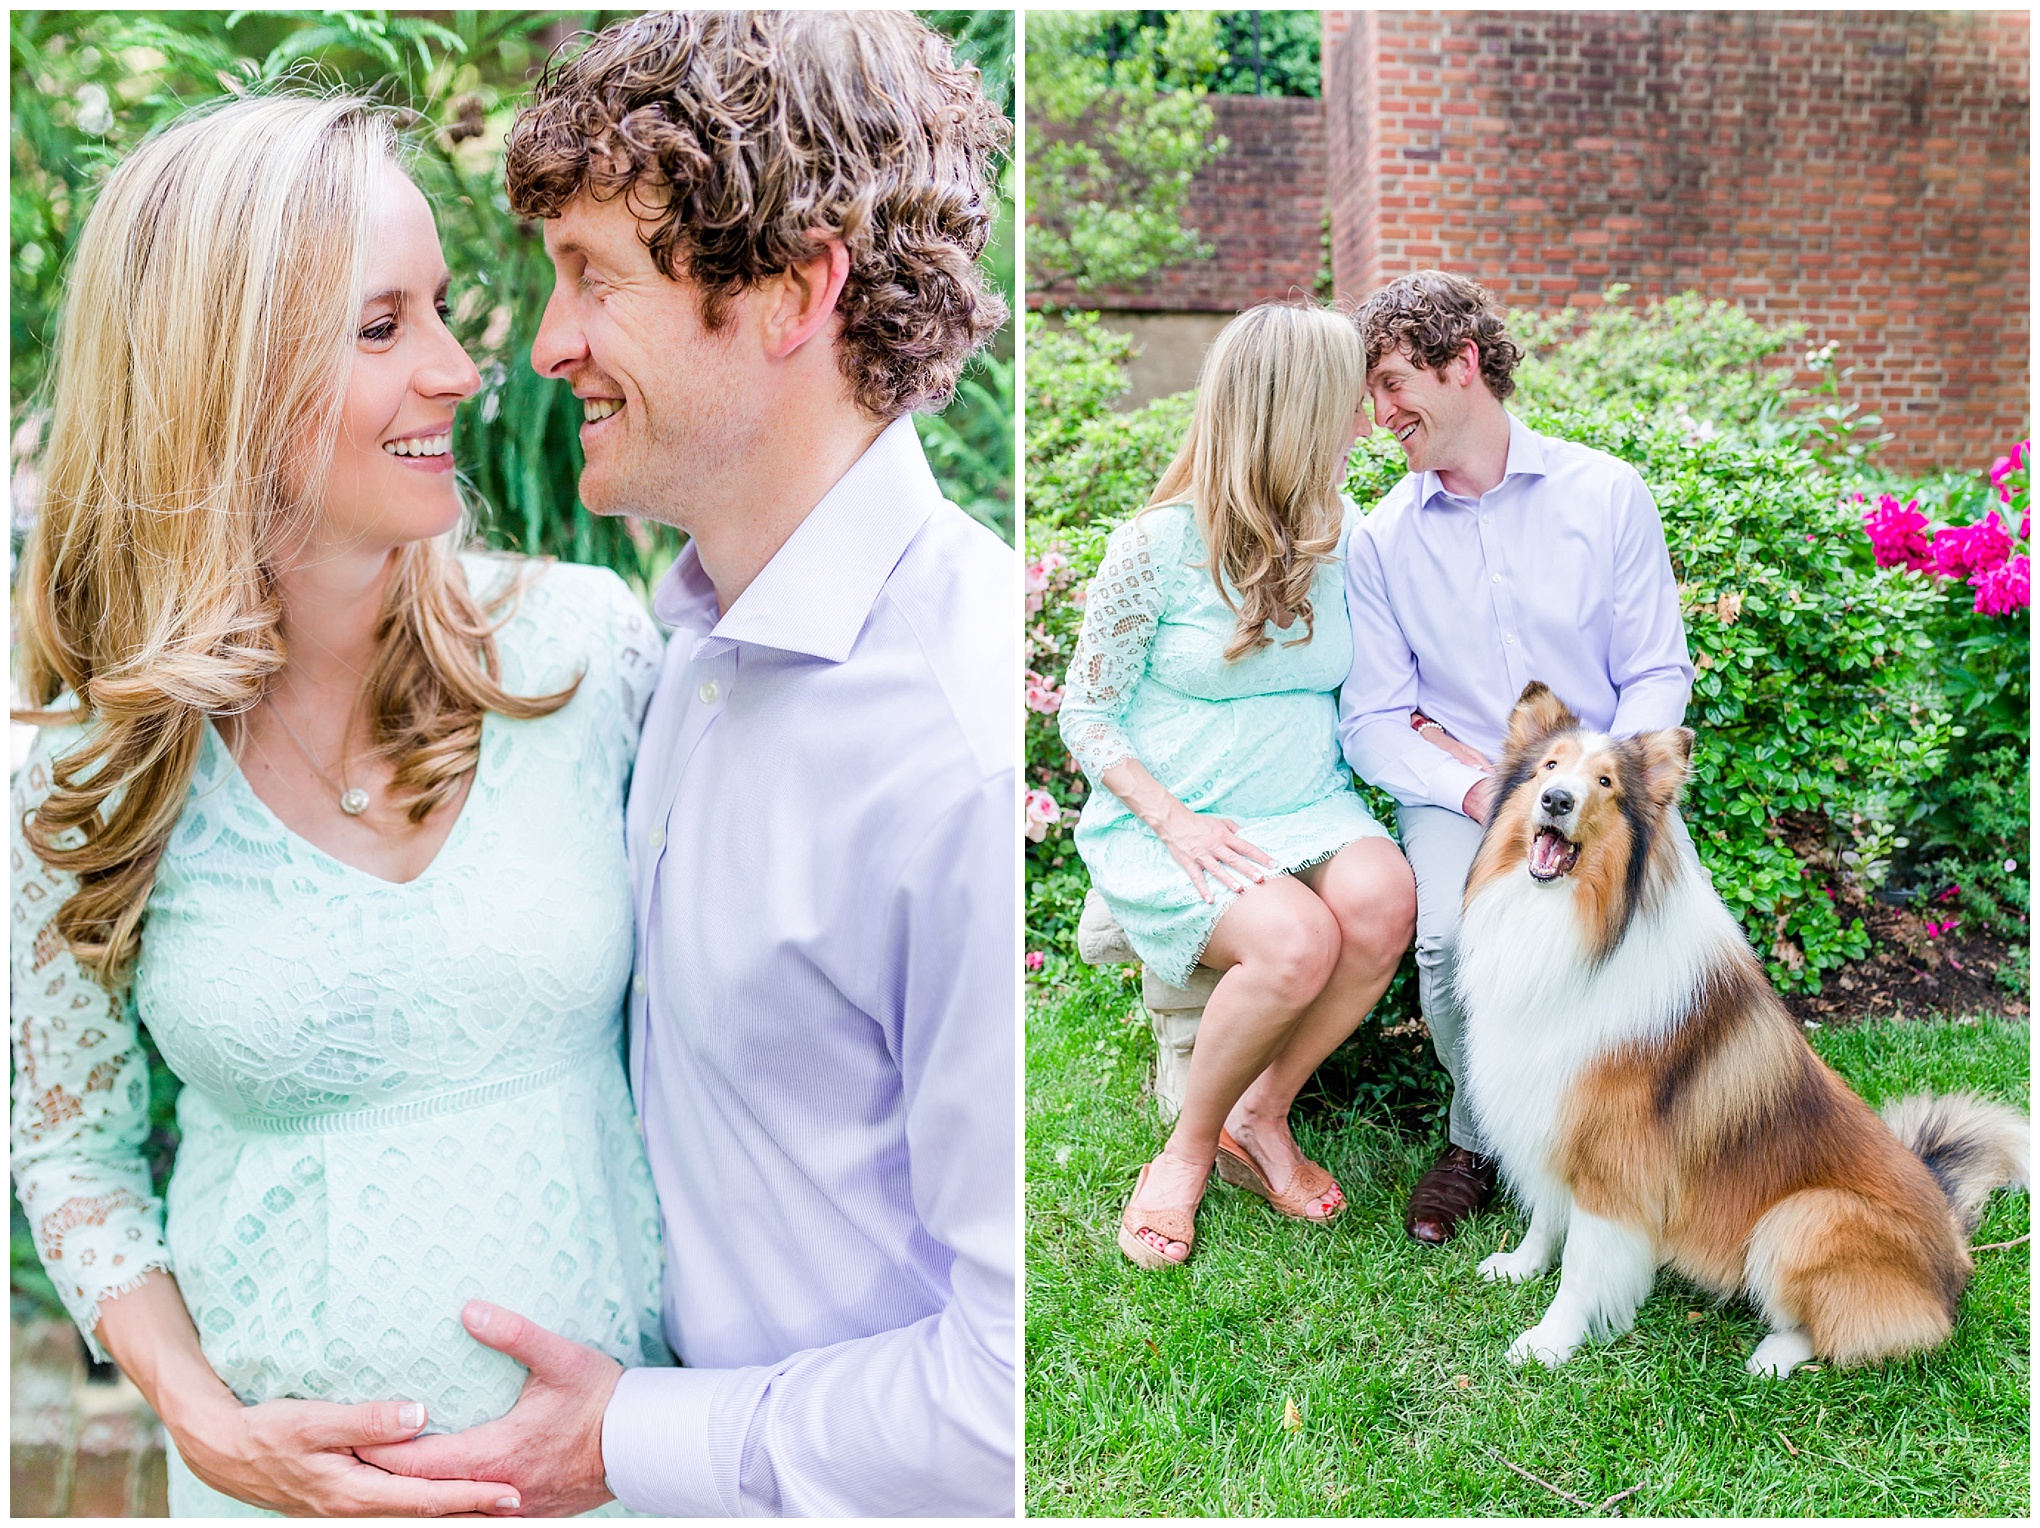 Georgetown maternity photos, married couple, pregnant woman, garden, baby bump, collie dog